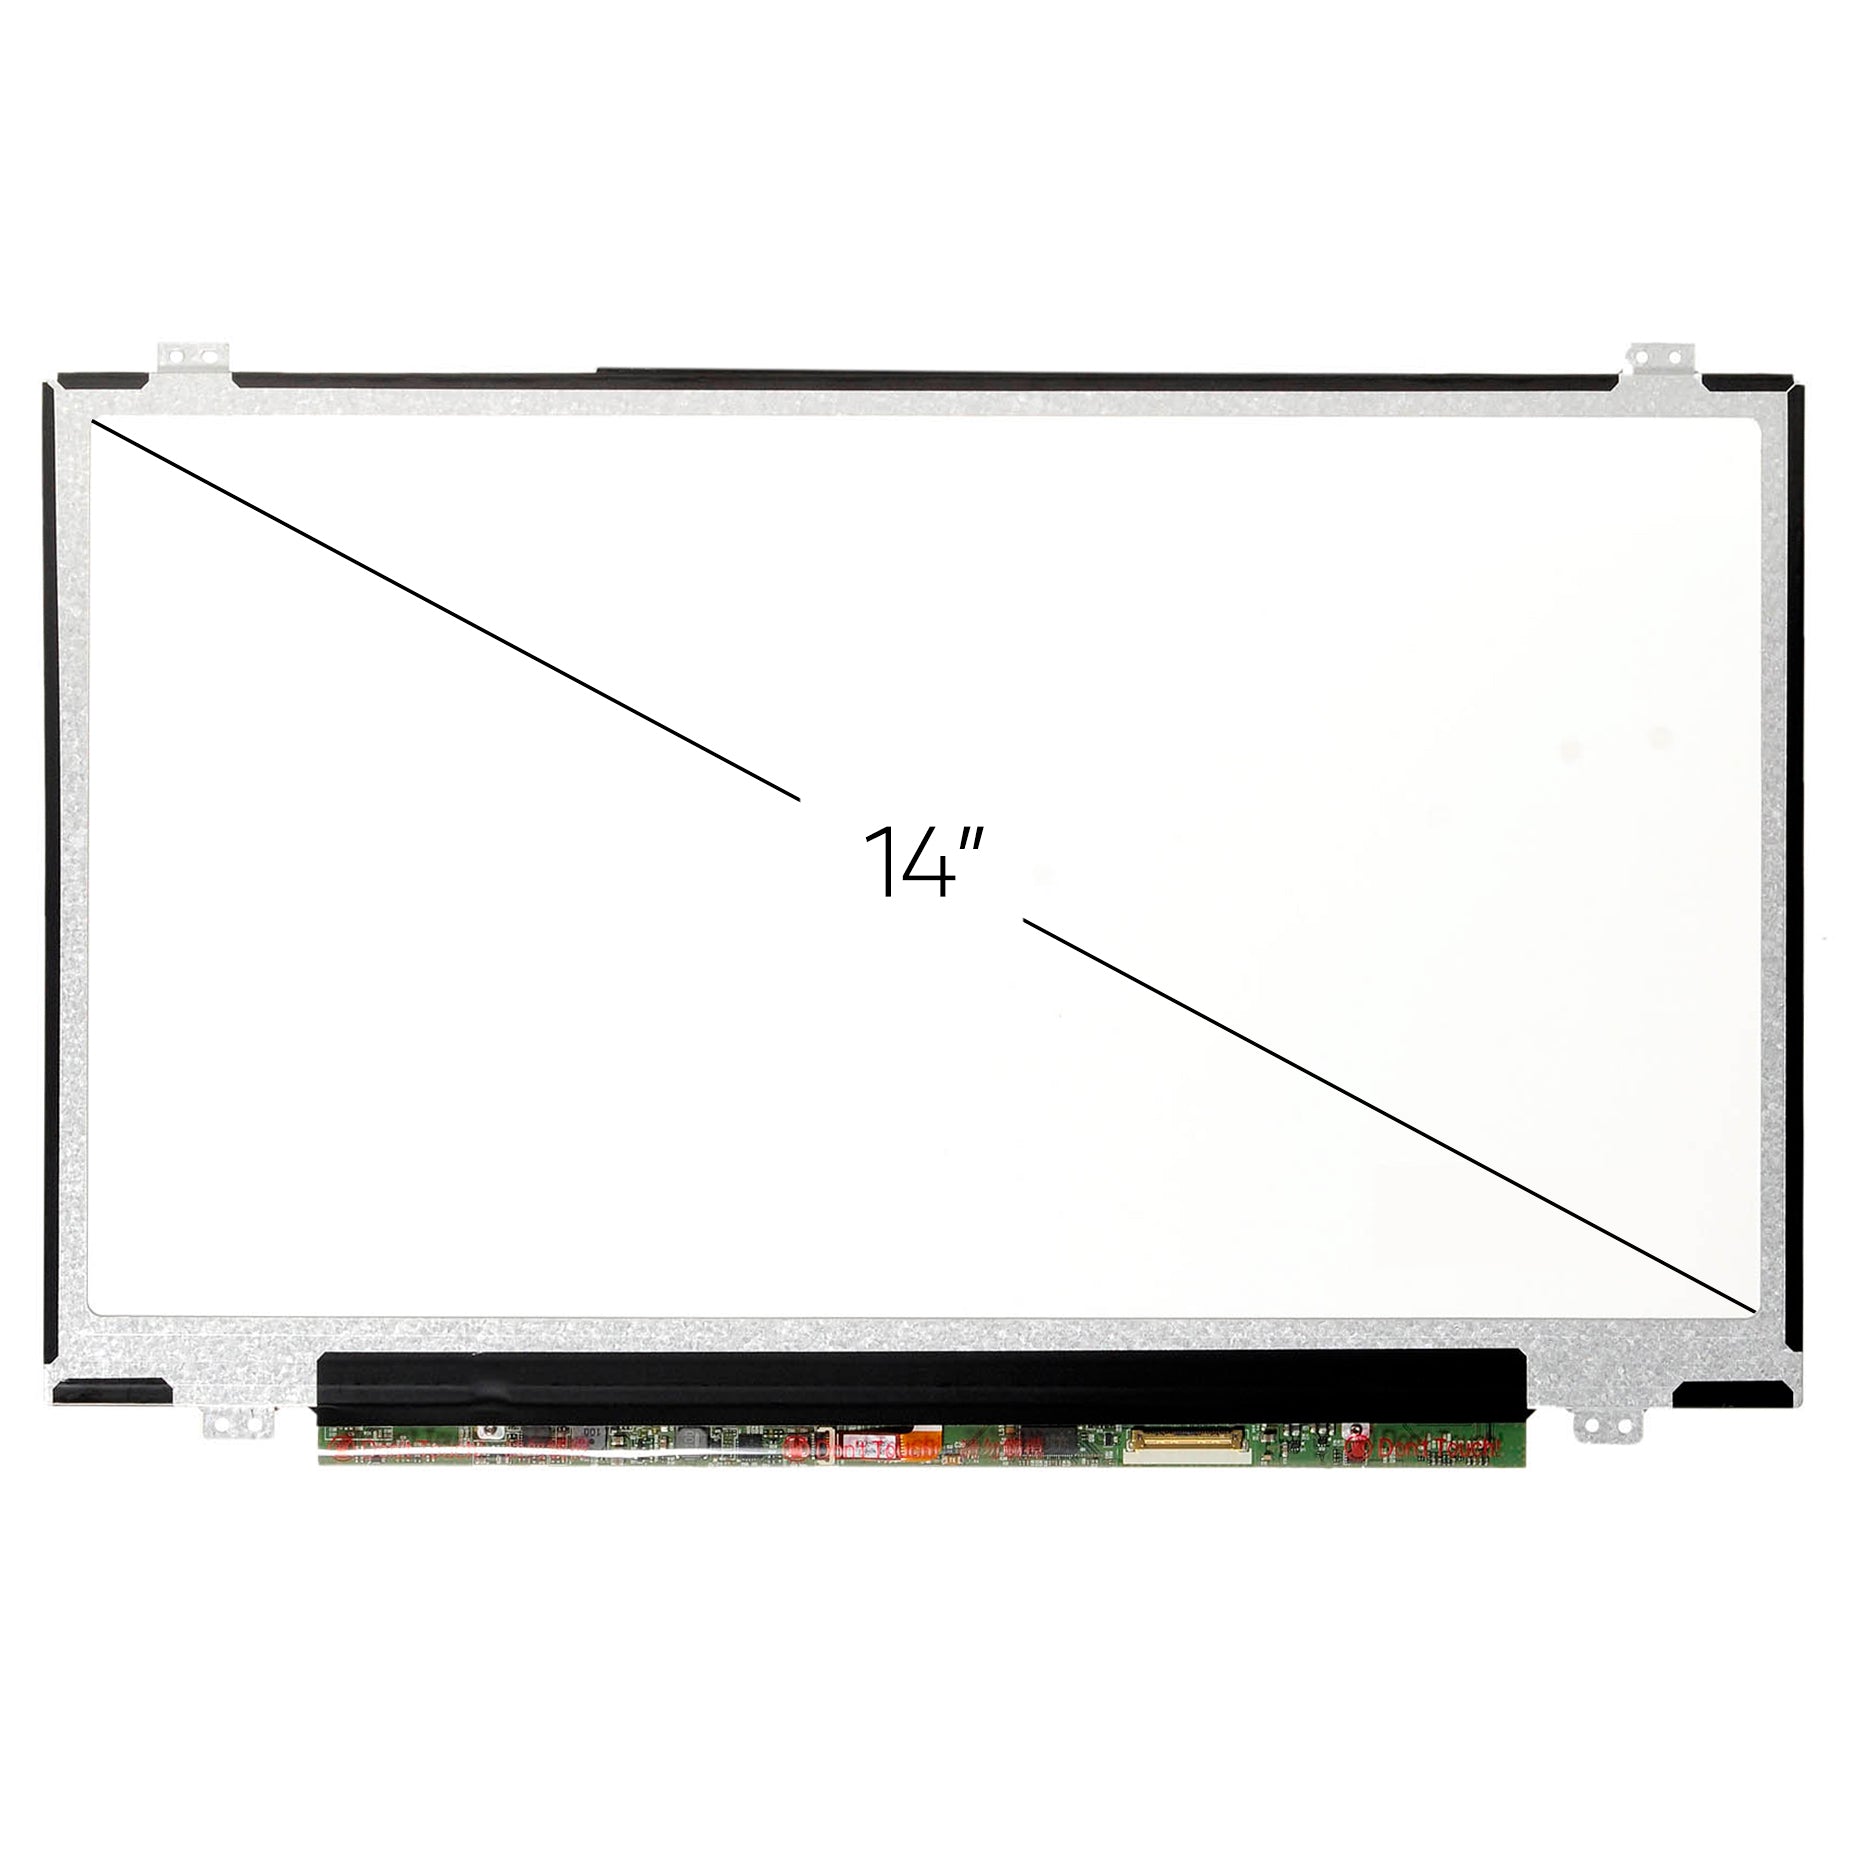 Screen Replacement for NV140FHM-N46 FHD 1920x1080 IPS Matte LCD LED Display